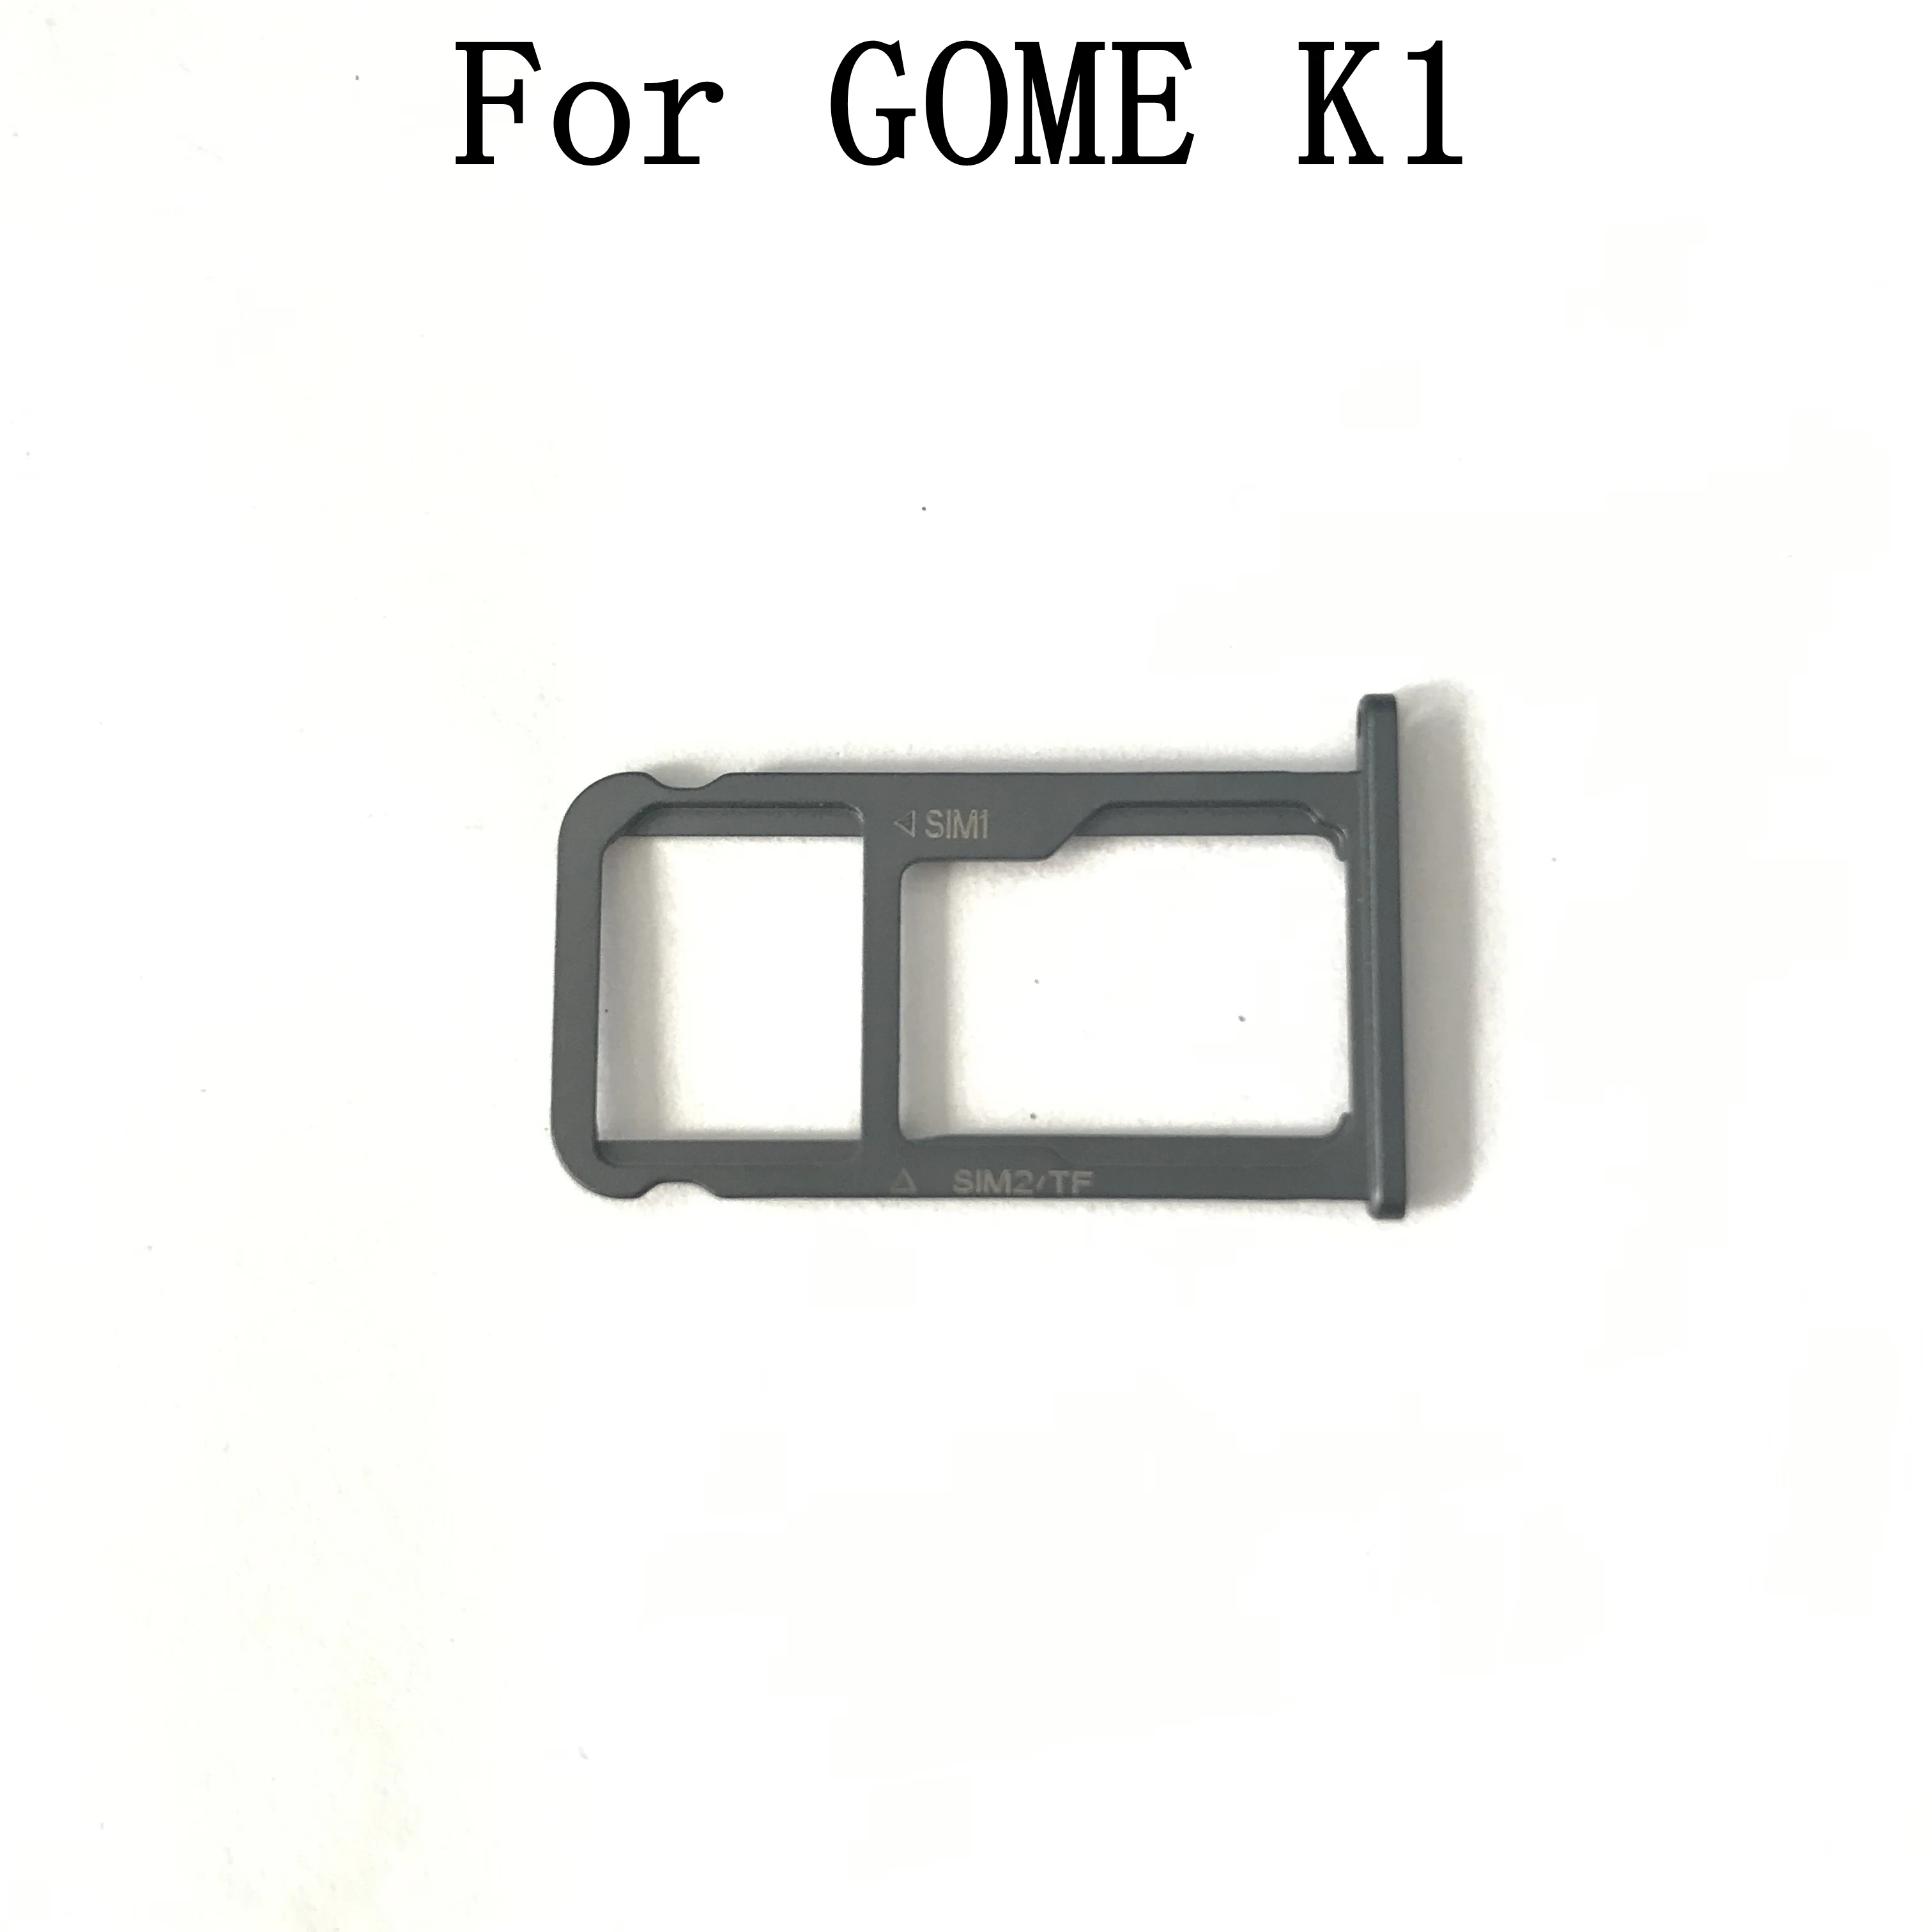 

GOME K1 Sim Card Holder Tray Card Slot For GOME K1 Repair Fixing Part Replacement